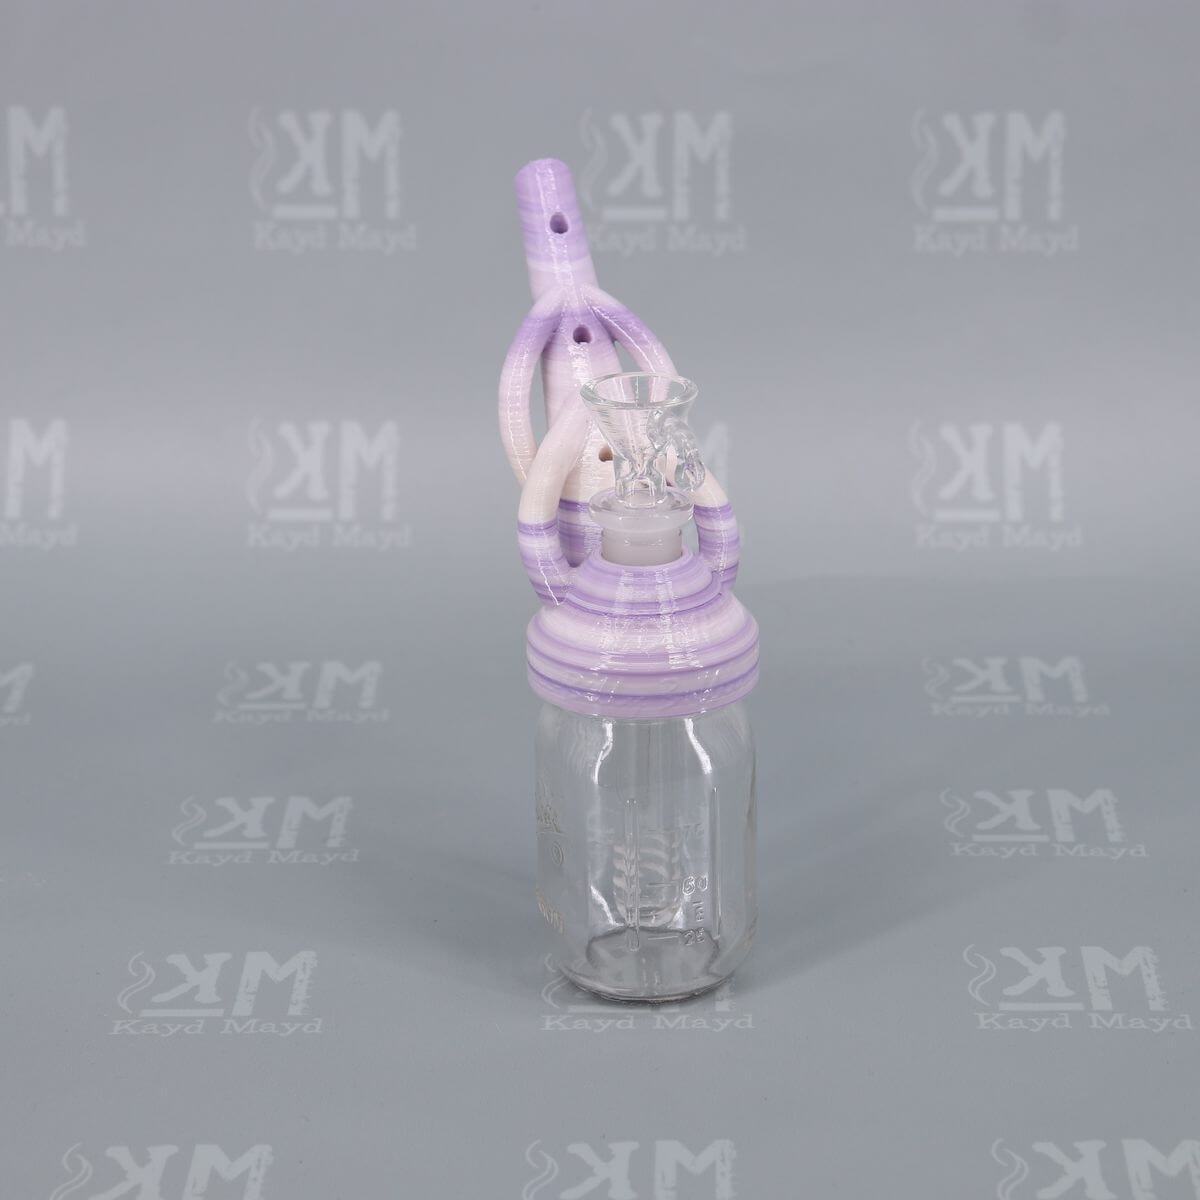 Creme de Purple color of Wee Billy Bubbler No. 2 - Amazing 3D Printed Water Pipe by Kayd Mayd